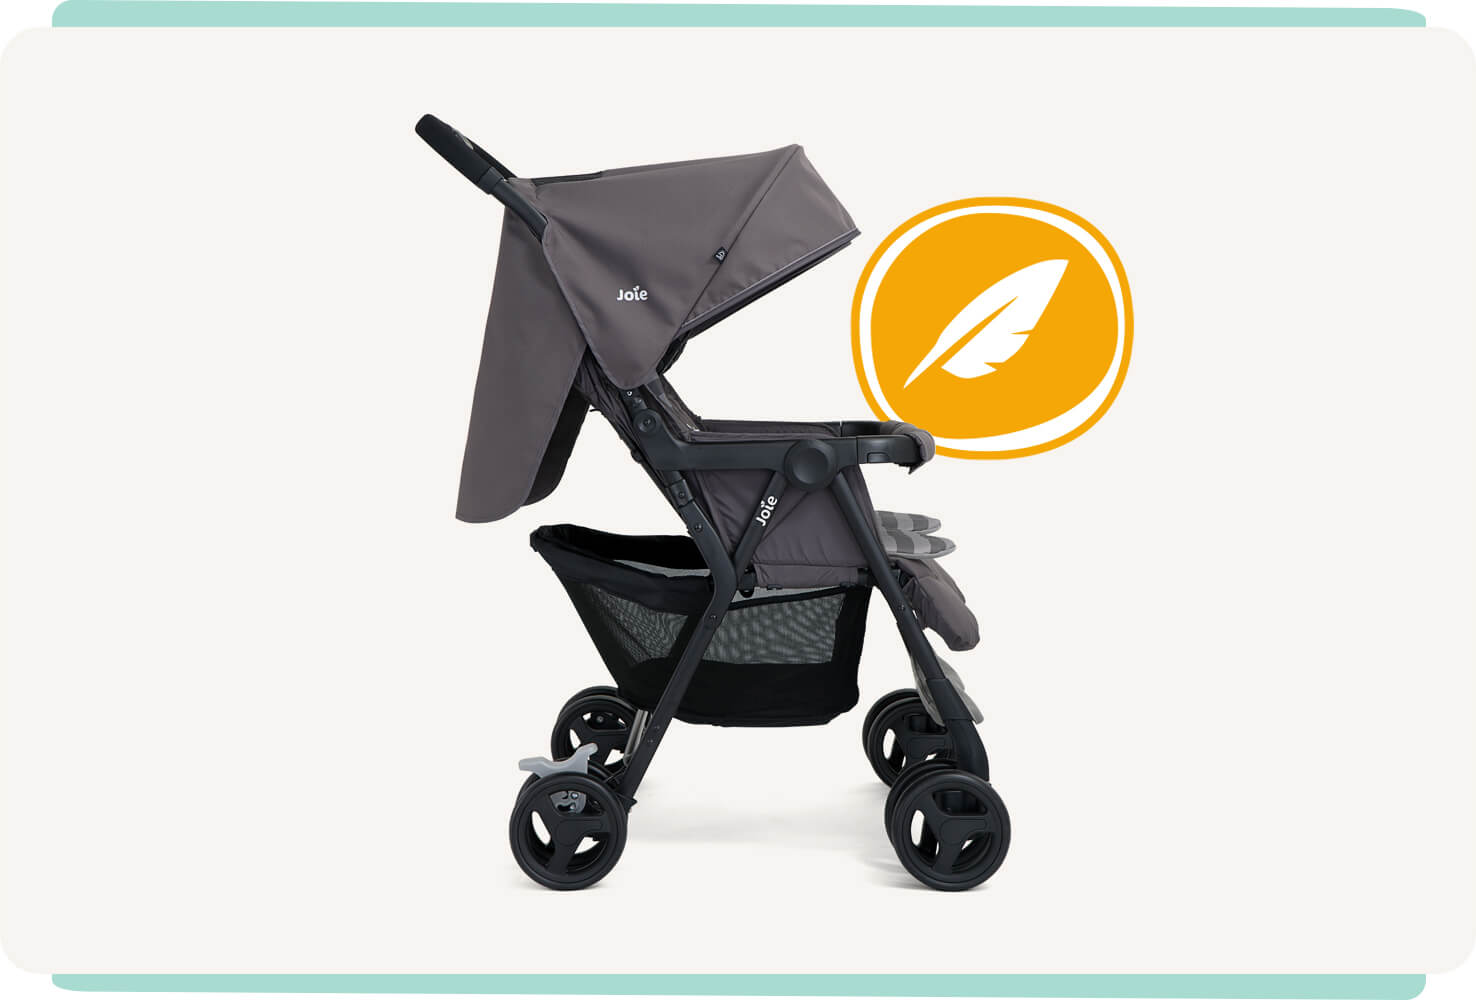 The Joie Aire Twin double stroller in light gray, in profile facing to the right, sitting next to an orange circle with a white outline and a white feather icon inside.